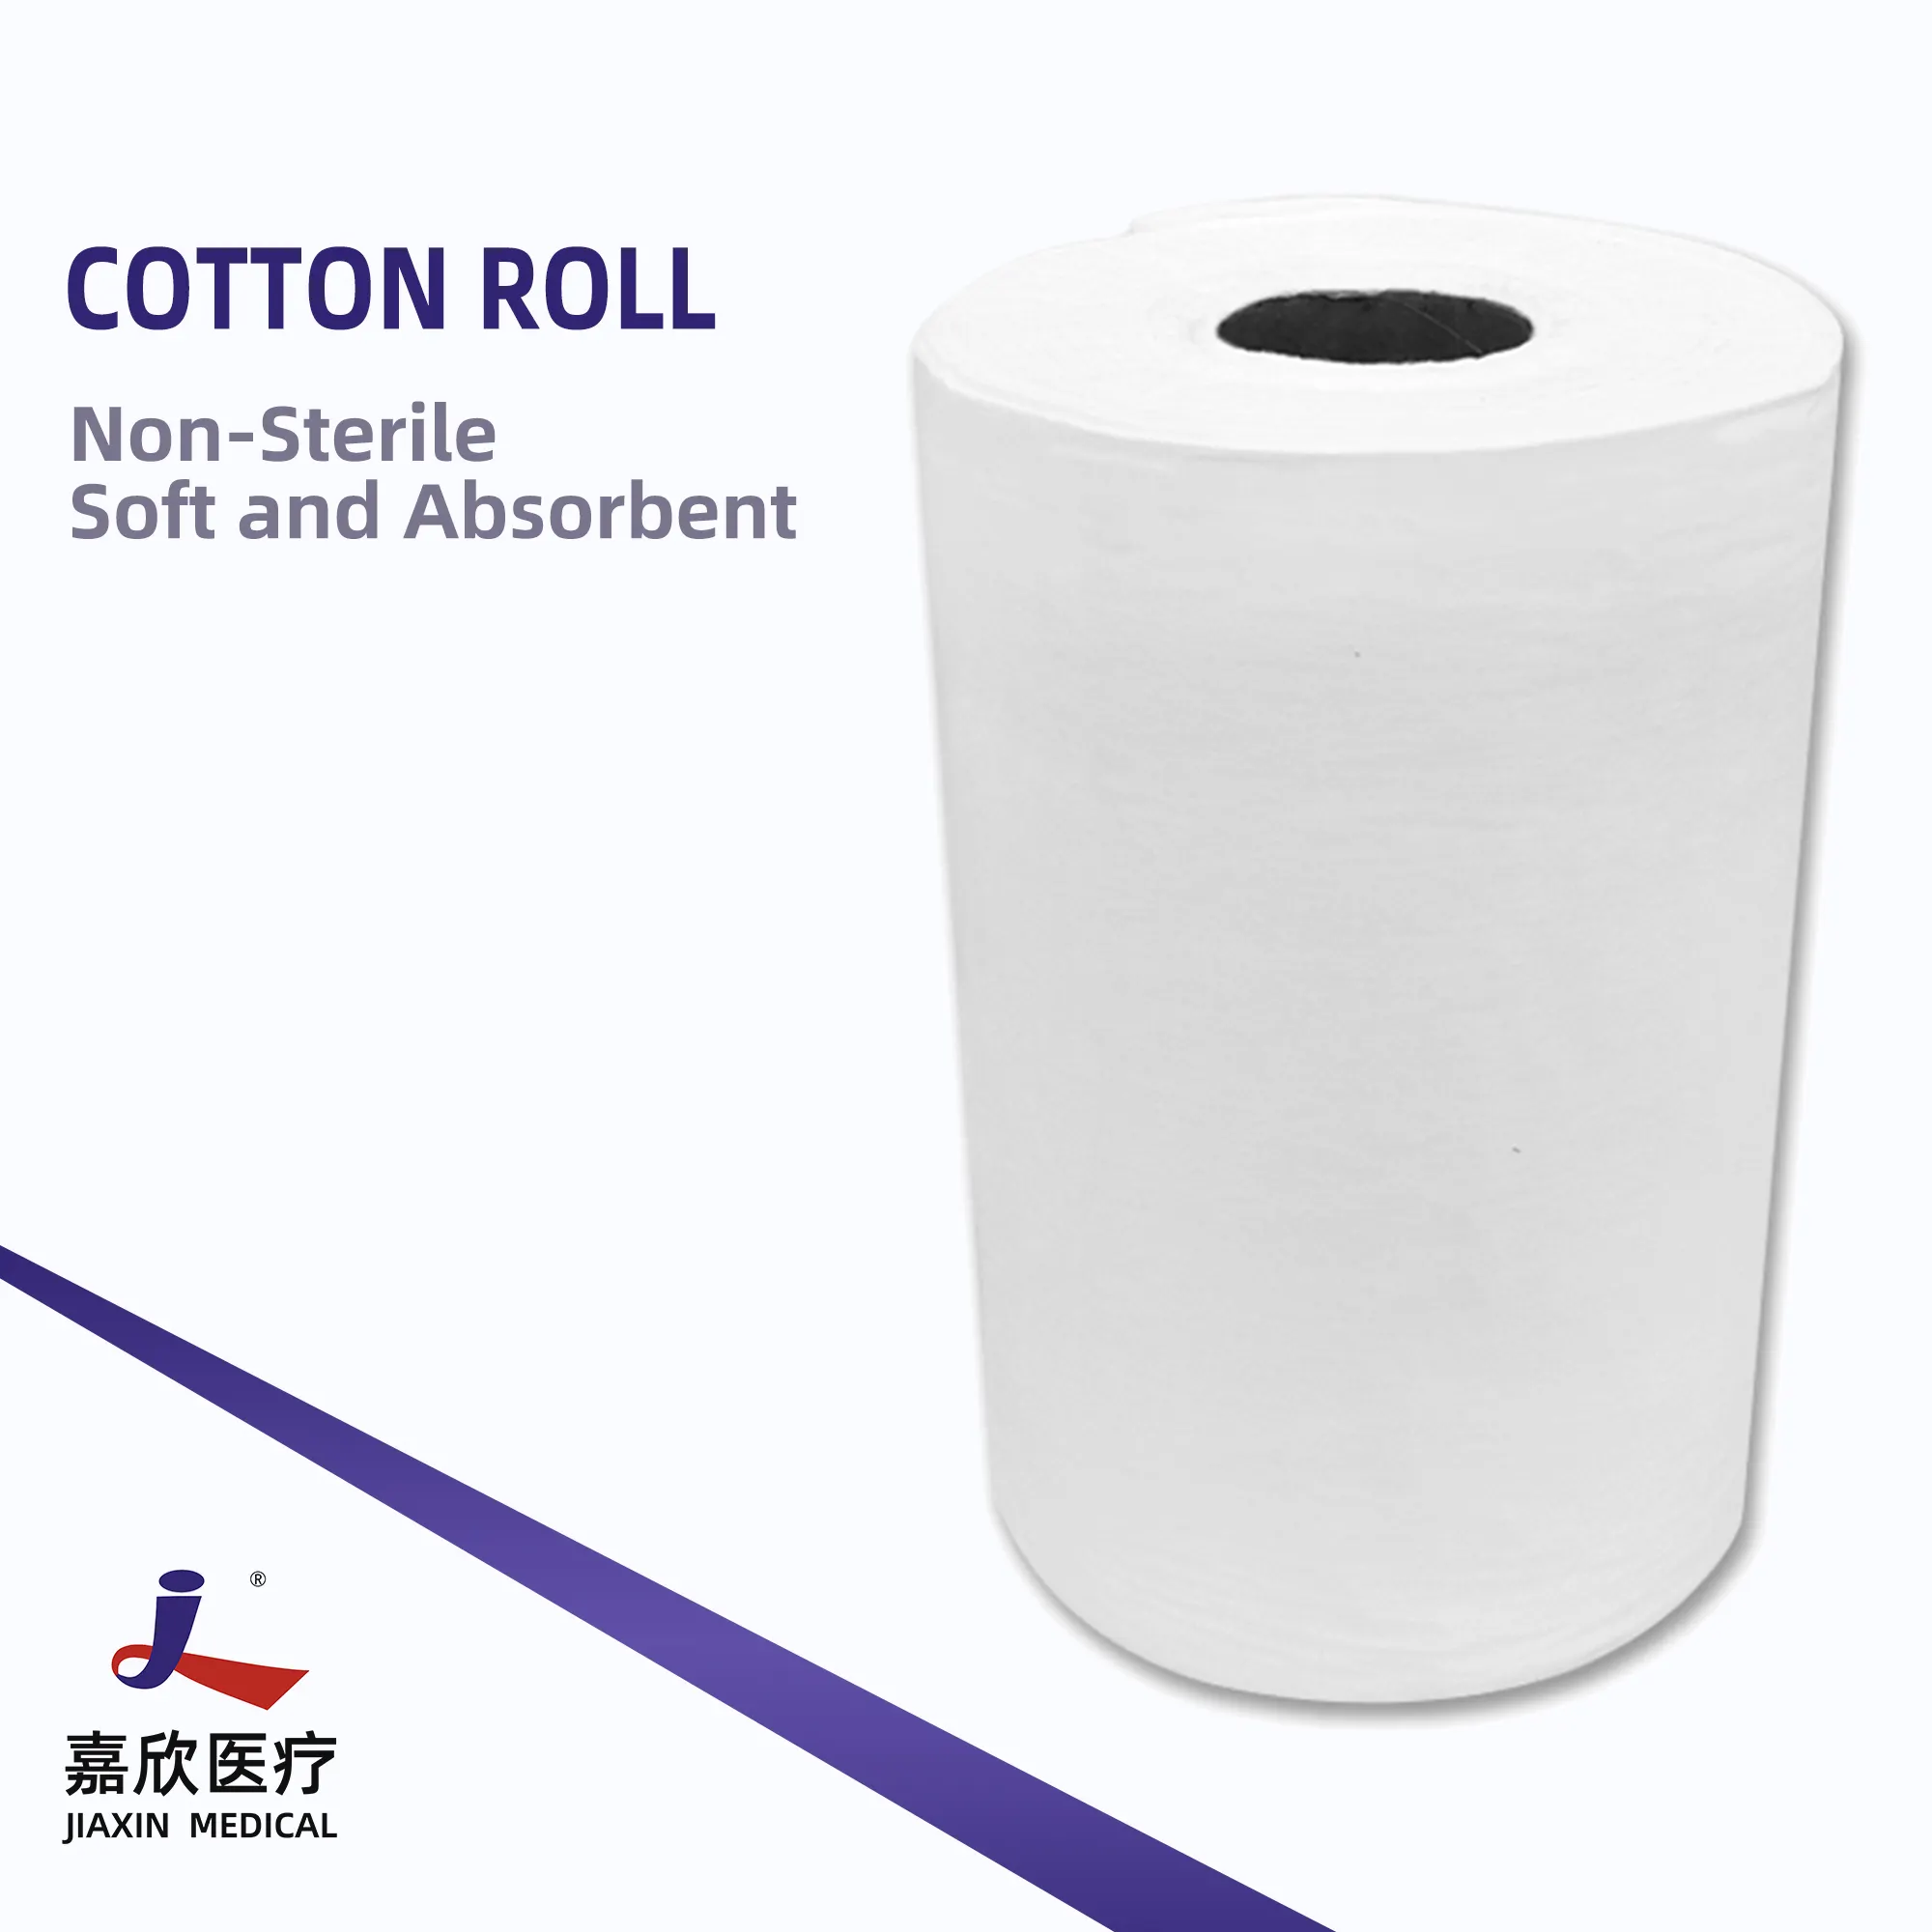 Combed Cotton Bamboo Spunlace Nonwoven Fabric Spunlace Composite Nonwoven Fabric Rolls Cotton Roll